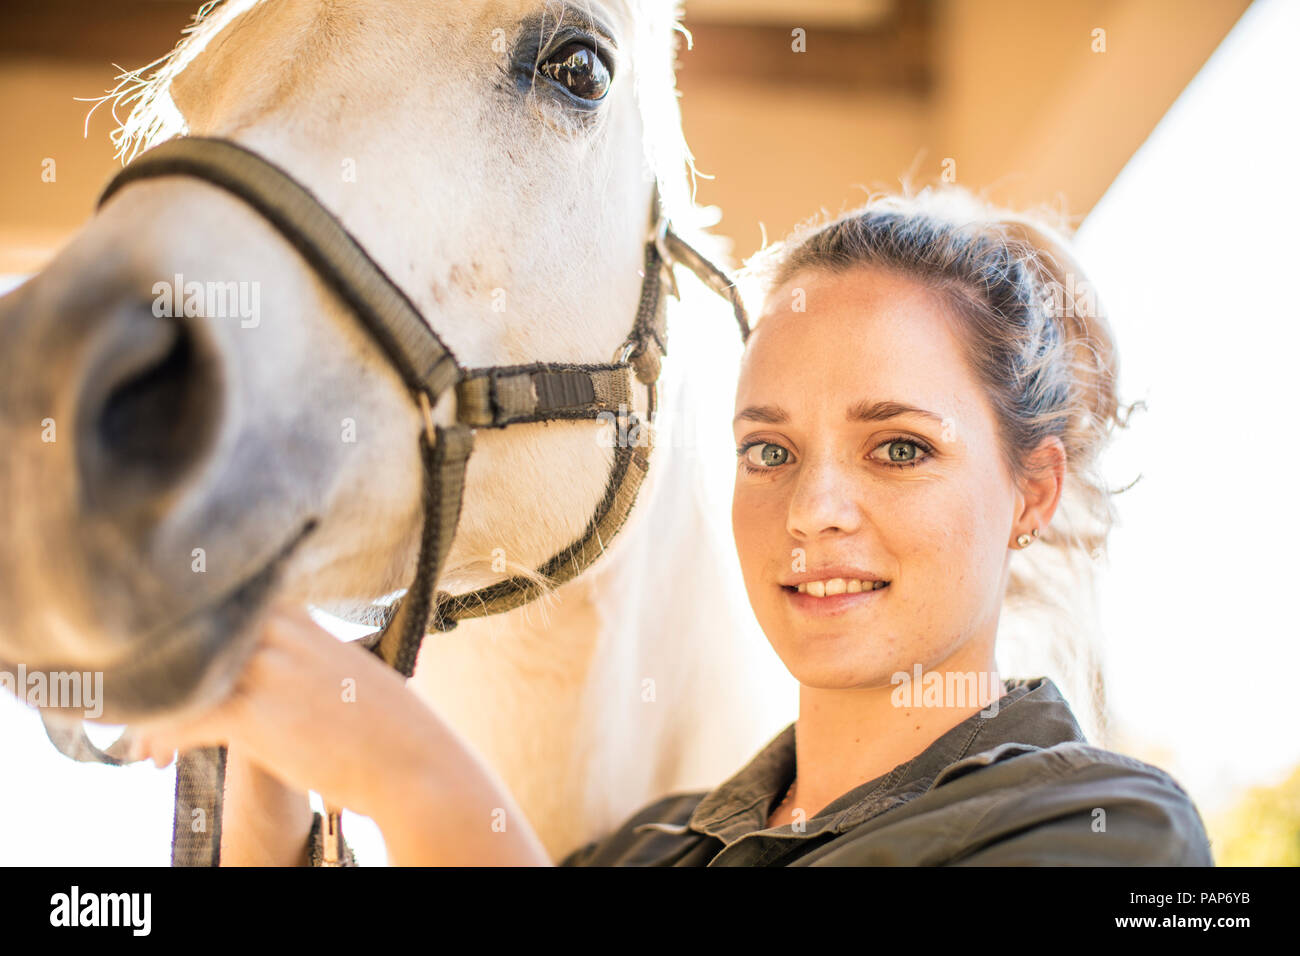 Portrait of smiling woman with a horse on a farm Stock Photo